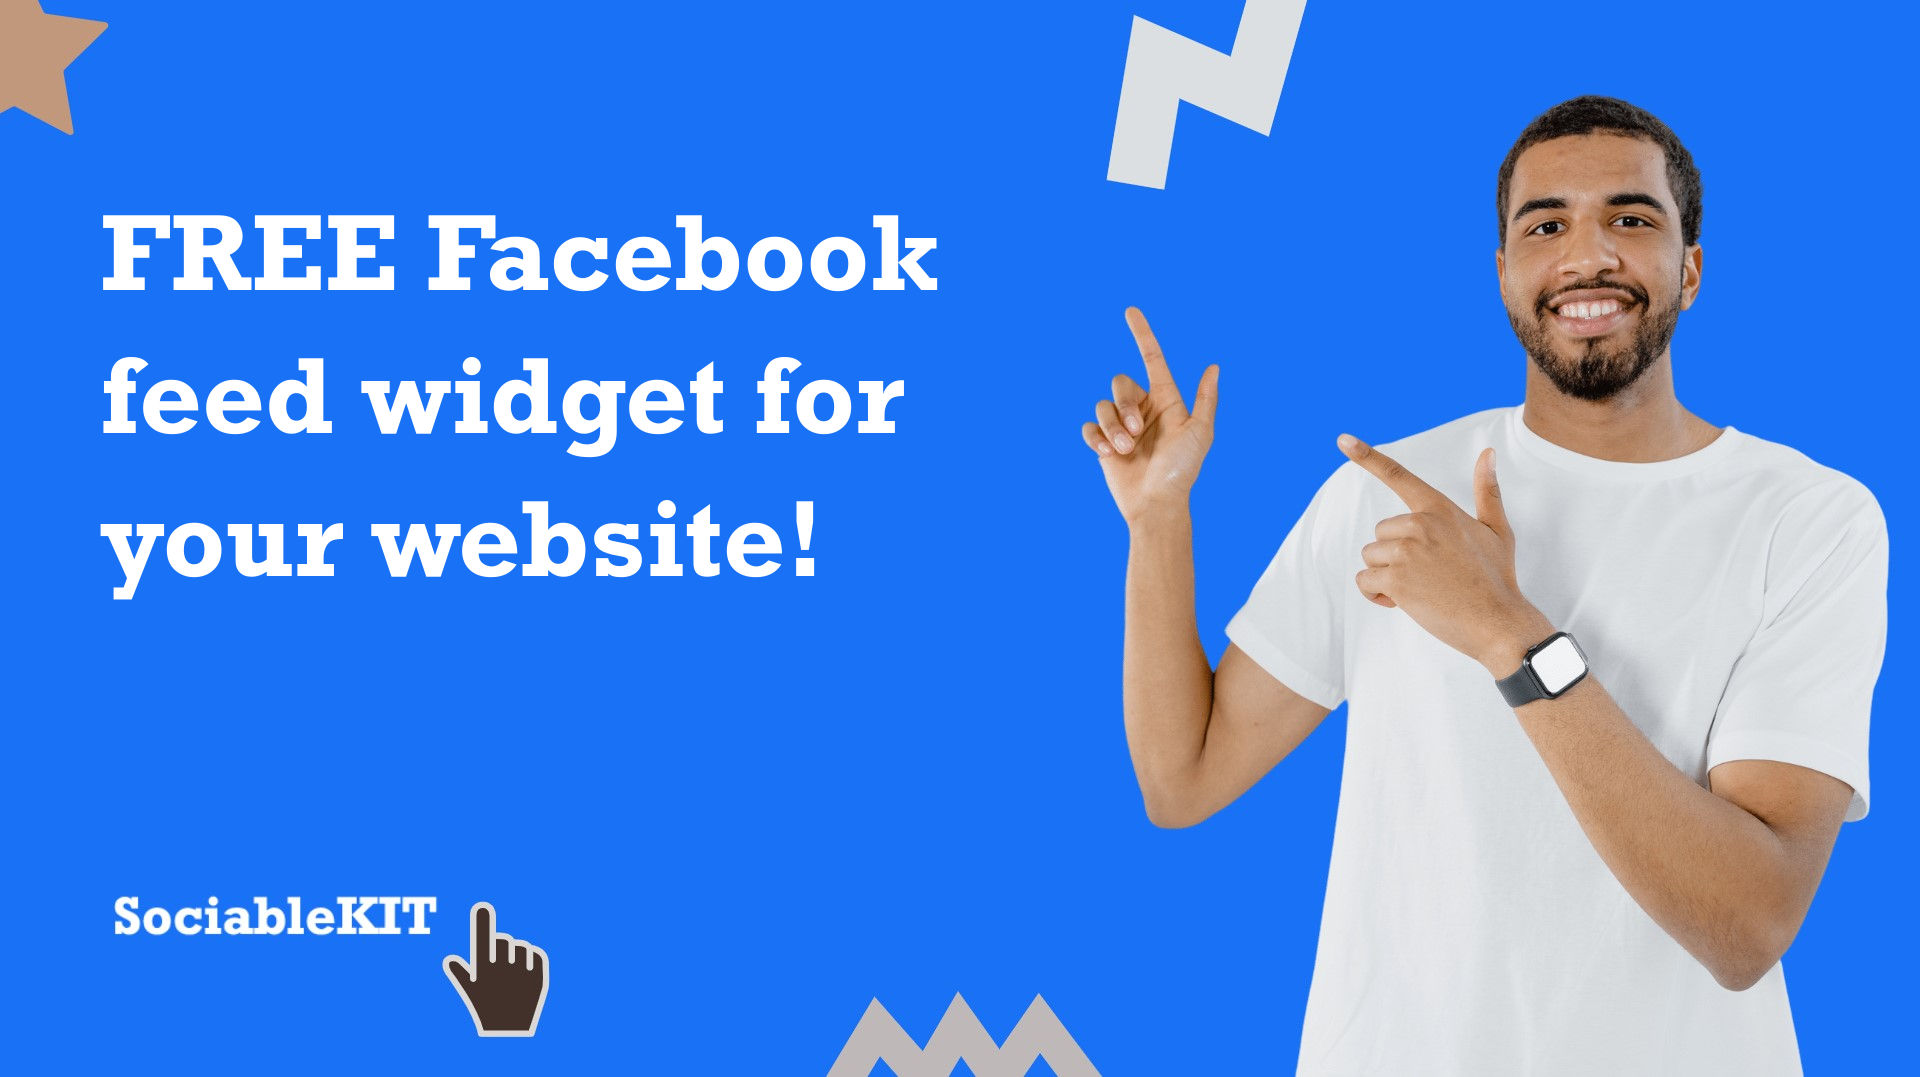 Free Facebook feed widget for your website